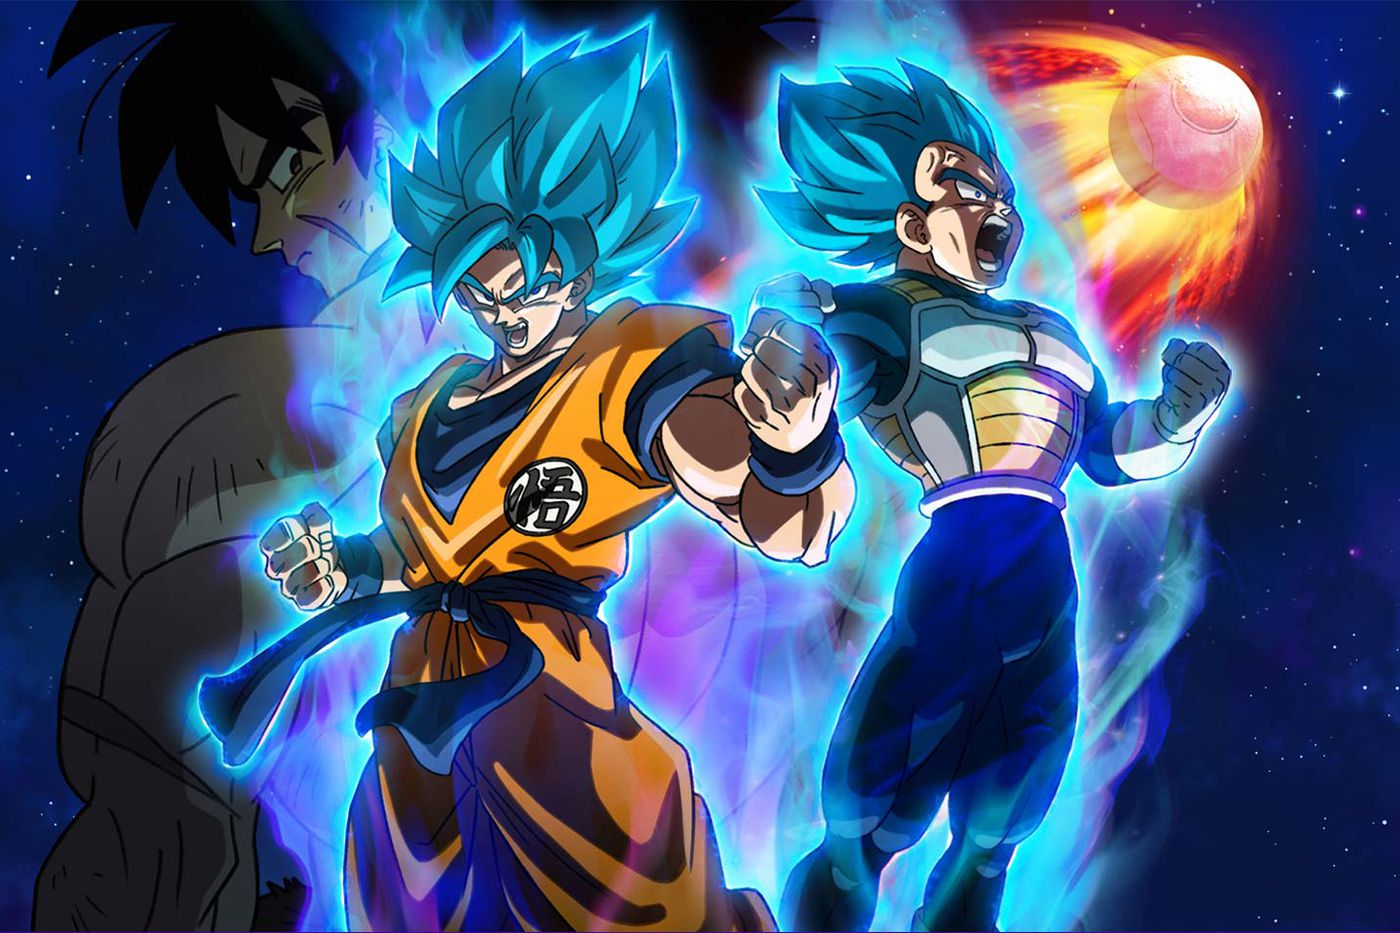 A new Dragon Ball Super movie is coming in 2022